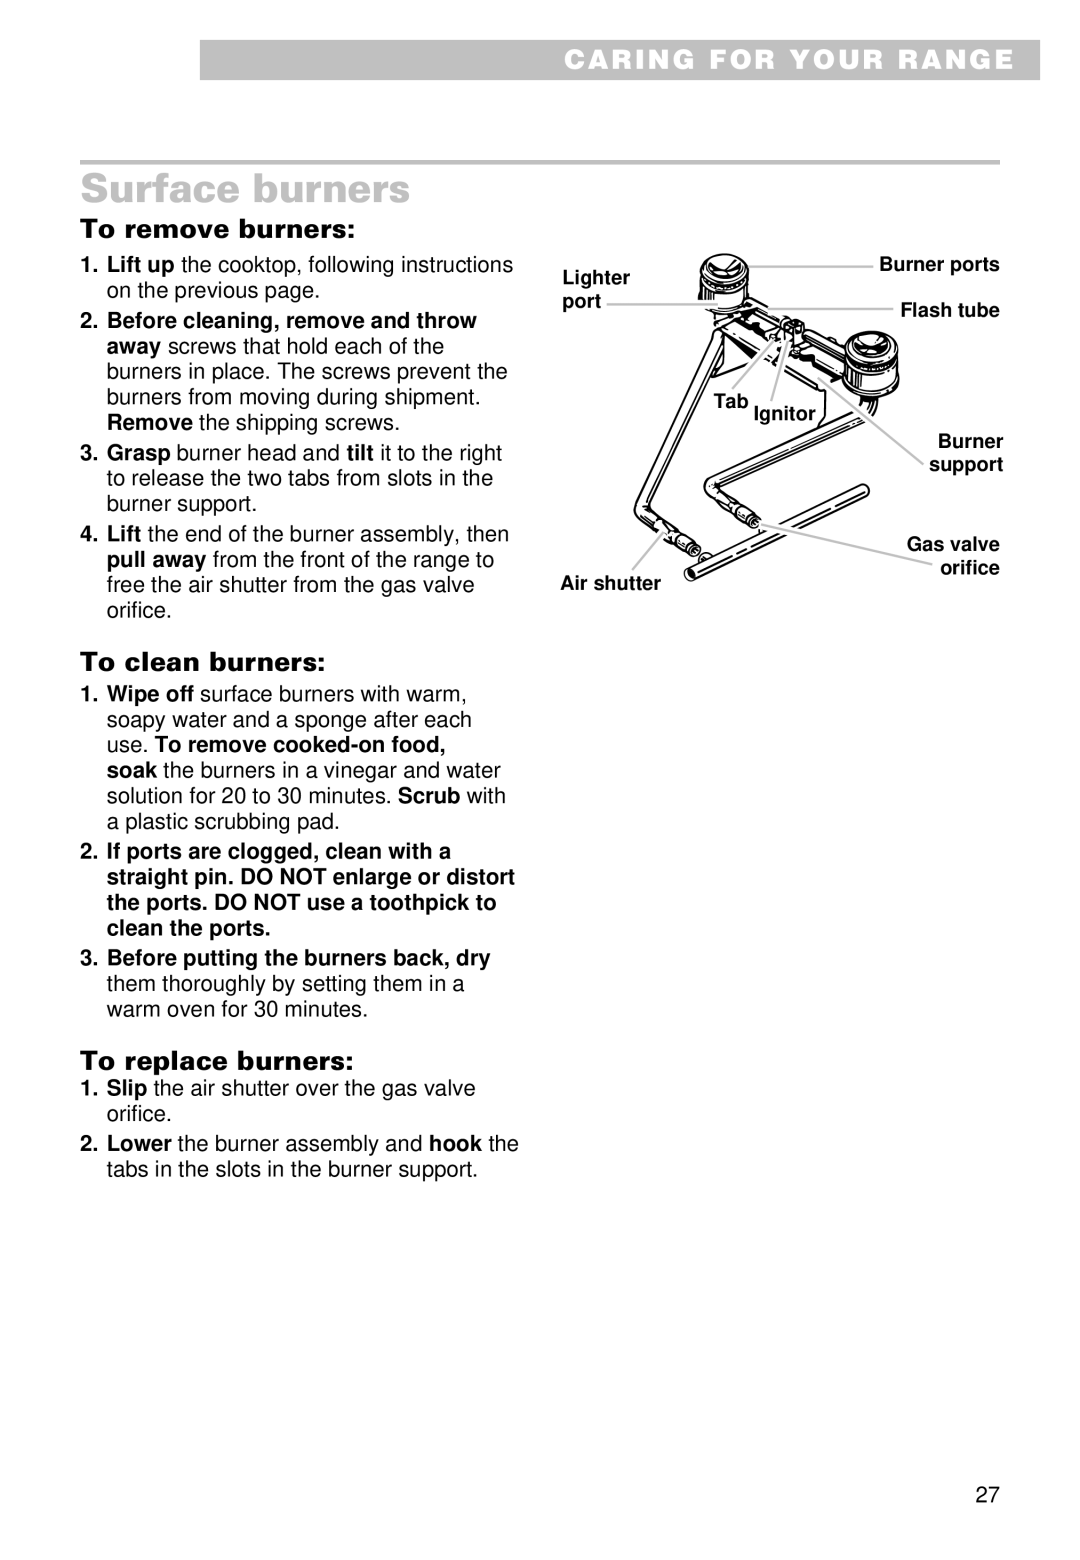 Whirlpool SS385PEE important safety instructions Surface burners, To remove burners, To clean burners, To replace burners 